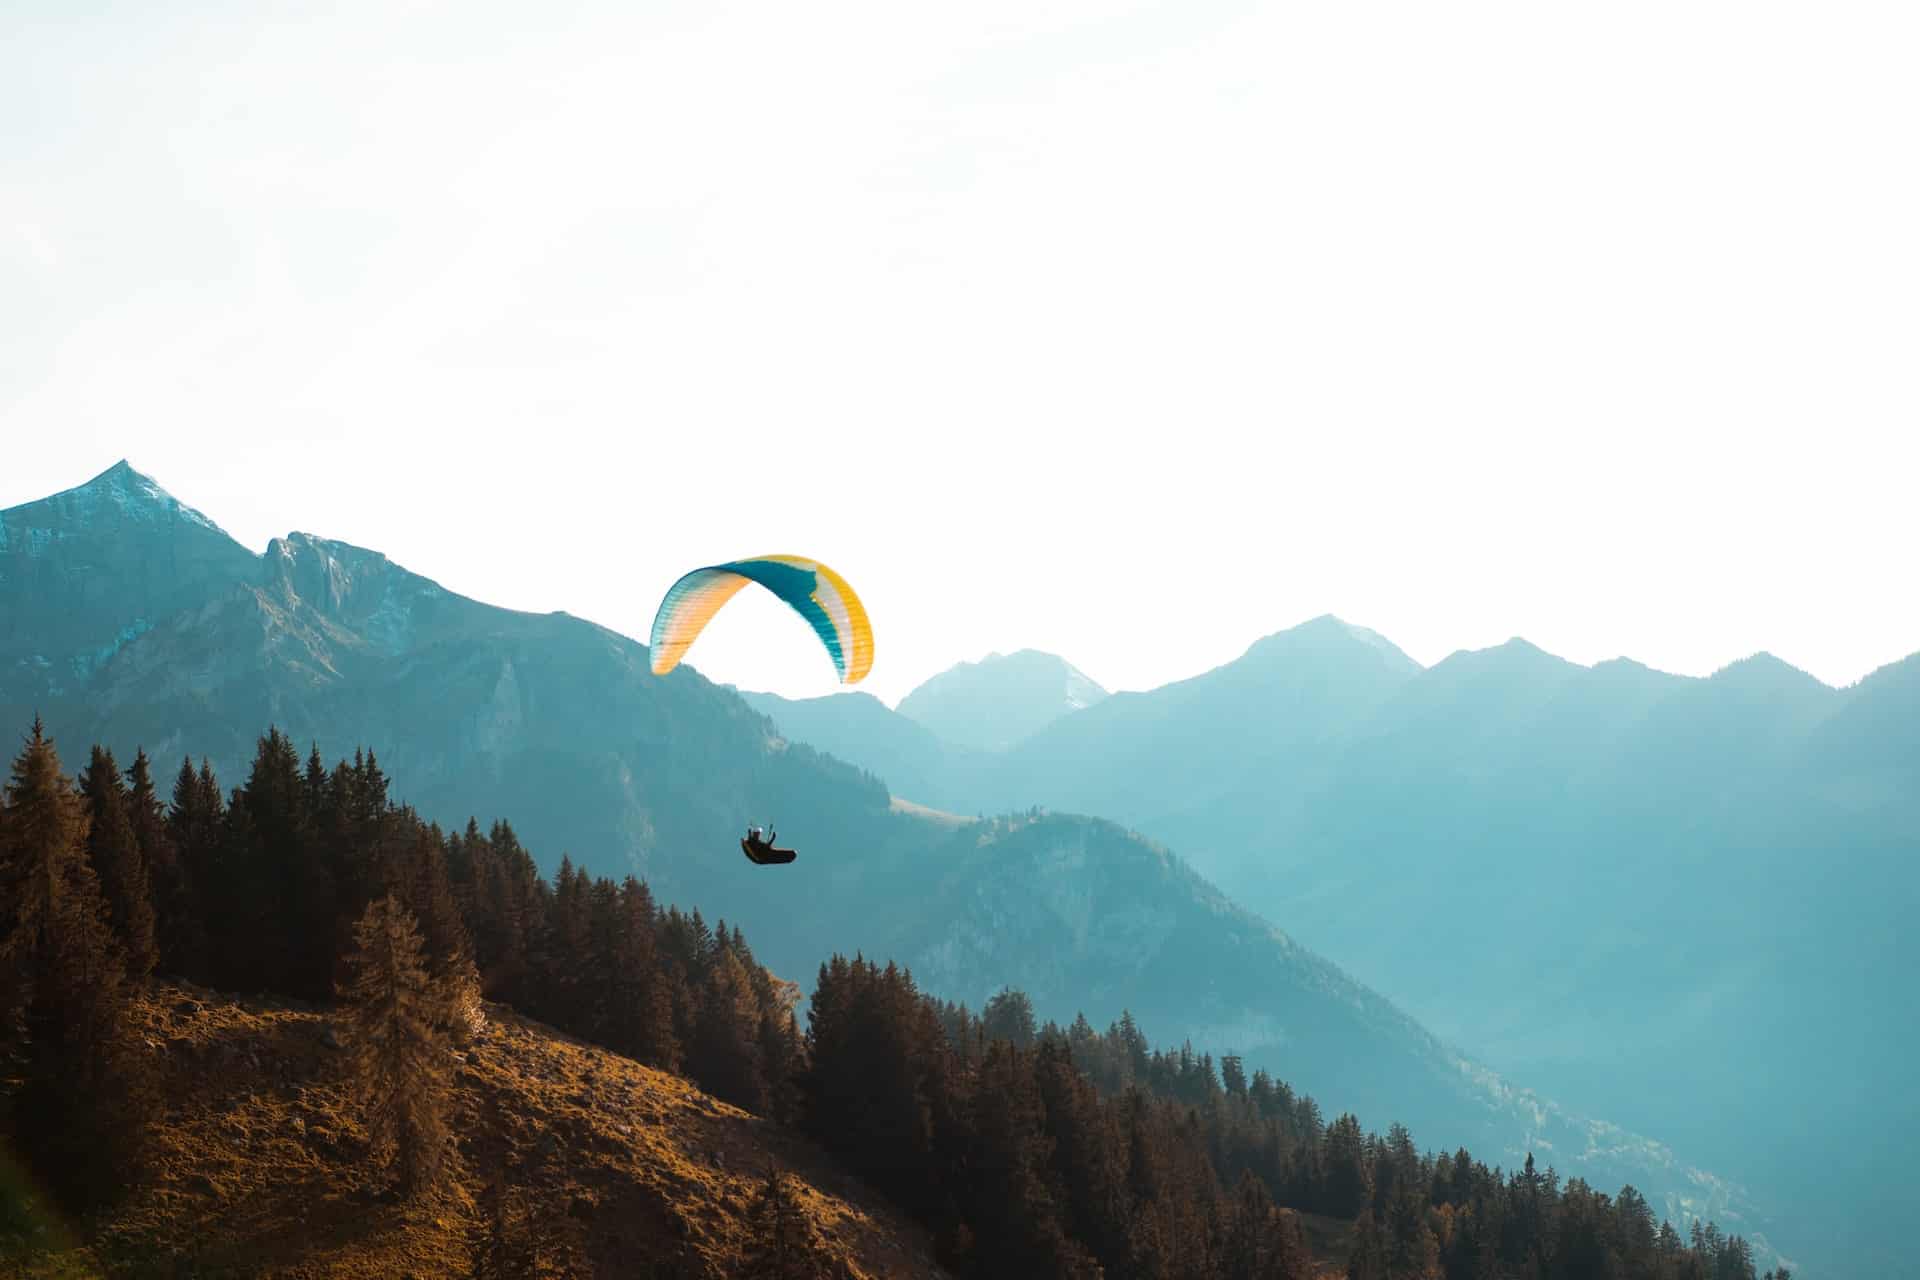 Paraglider, paramotor, and motoparaglider – the main differences